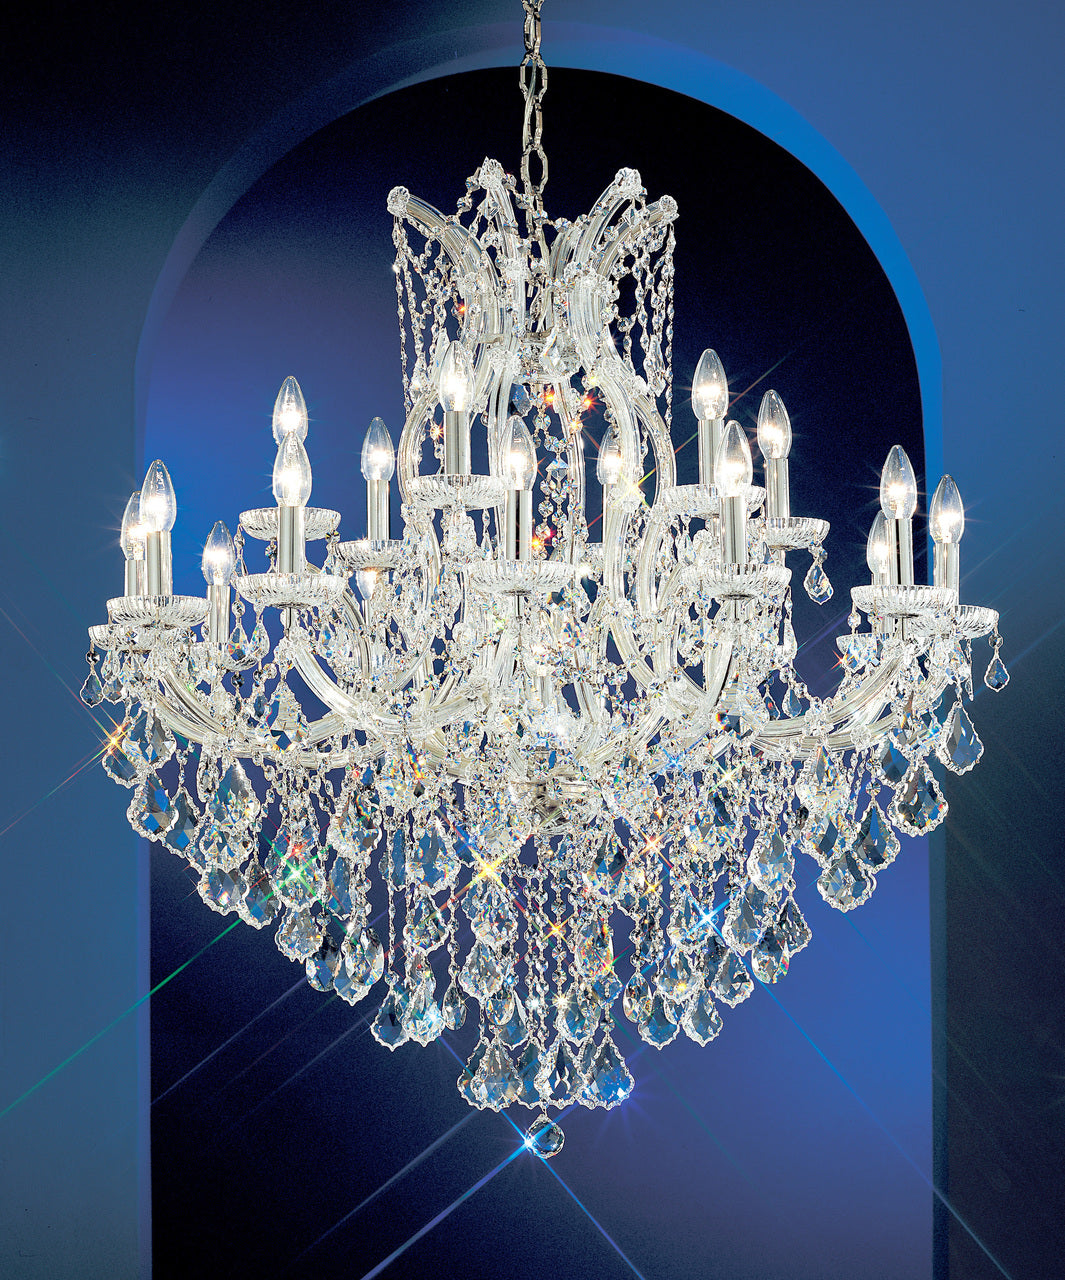 Classic Lighting 8138 CH C Maria Theresa Traditional Crystal Chandelier in Chrome (Imported from Italy)